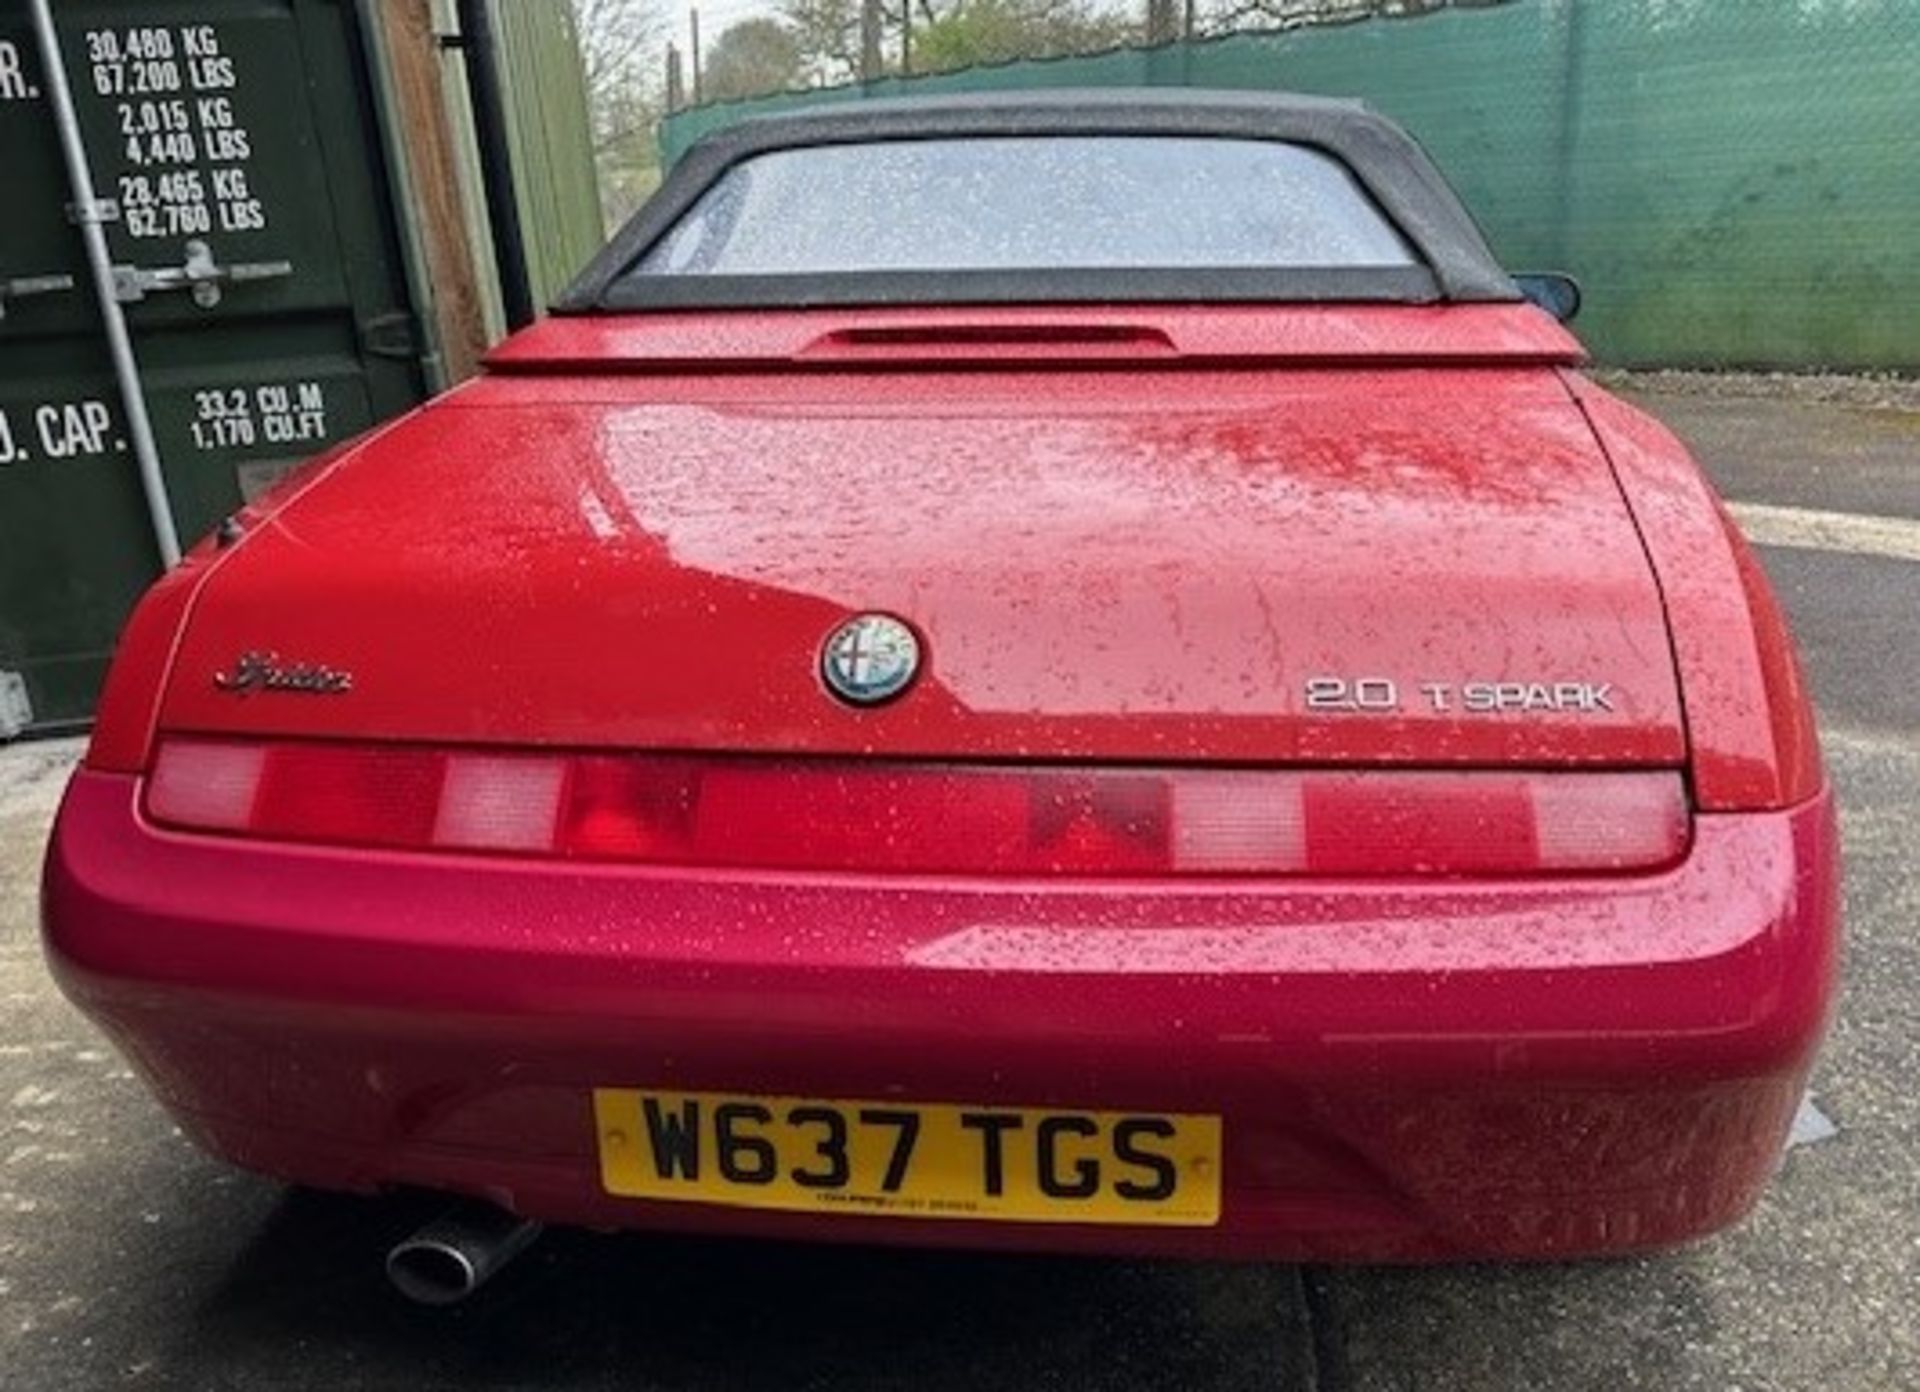 2000 Alfa Romeo Spider Lusso TS Spider Registration number W637 TGS Red with a black interior MOT - Image 2 of 14